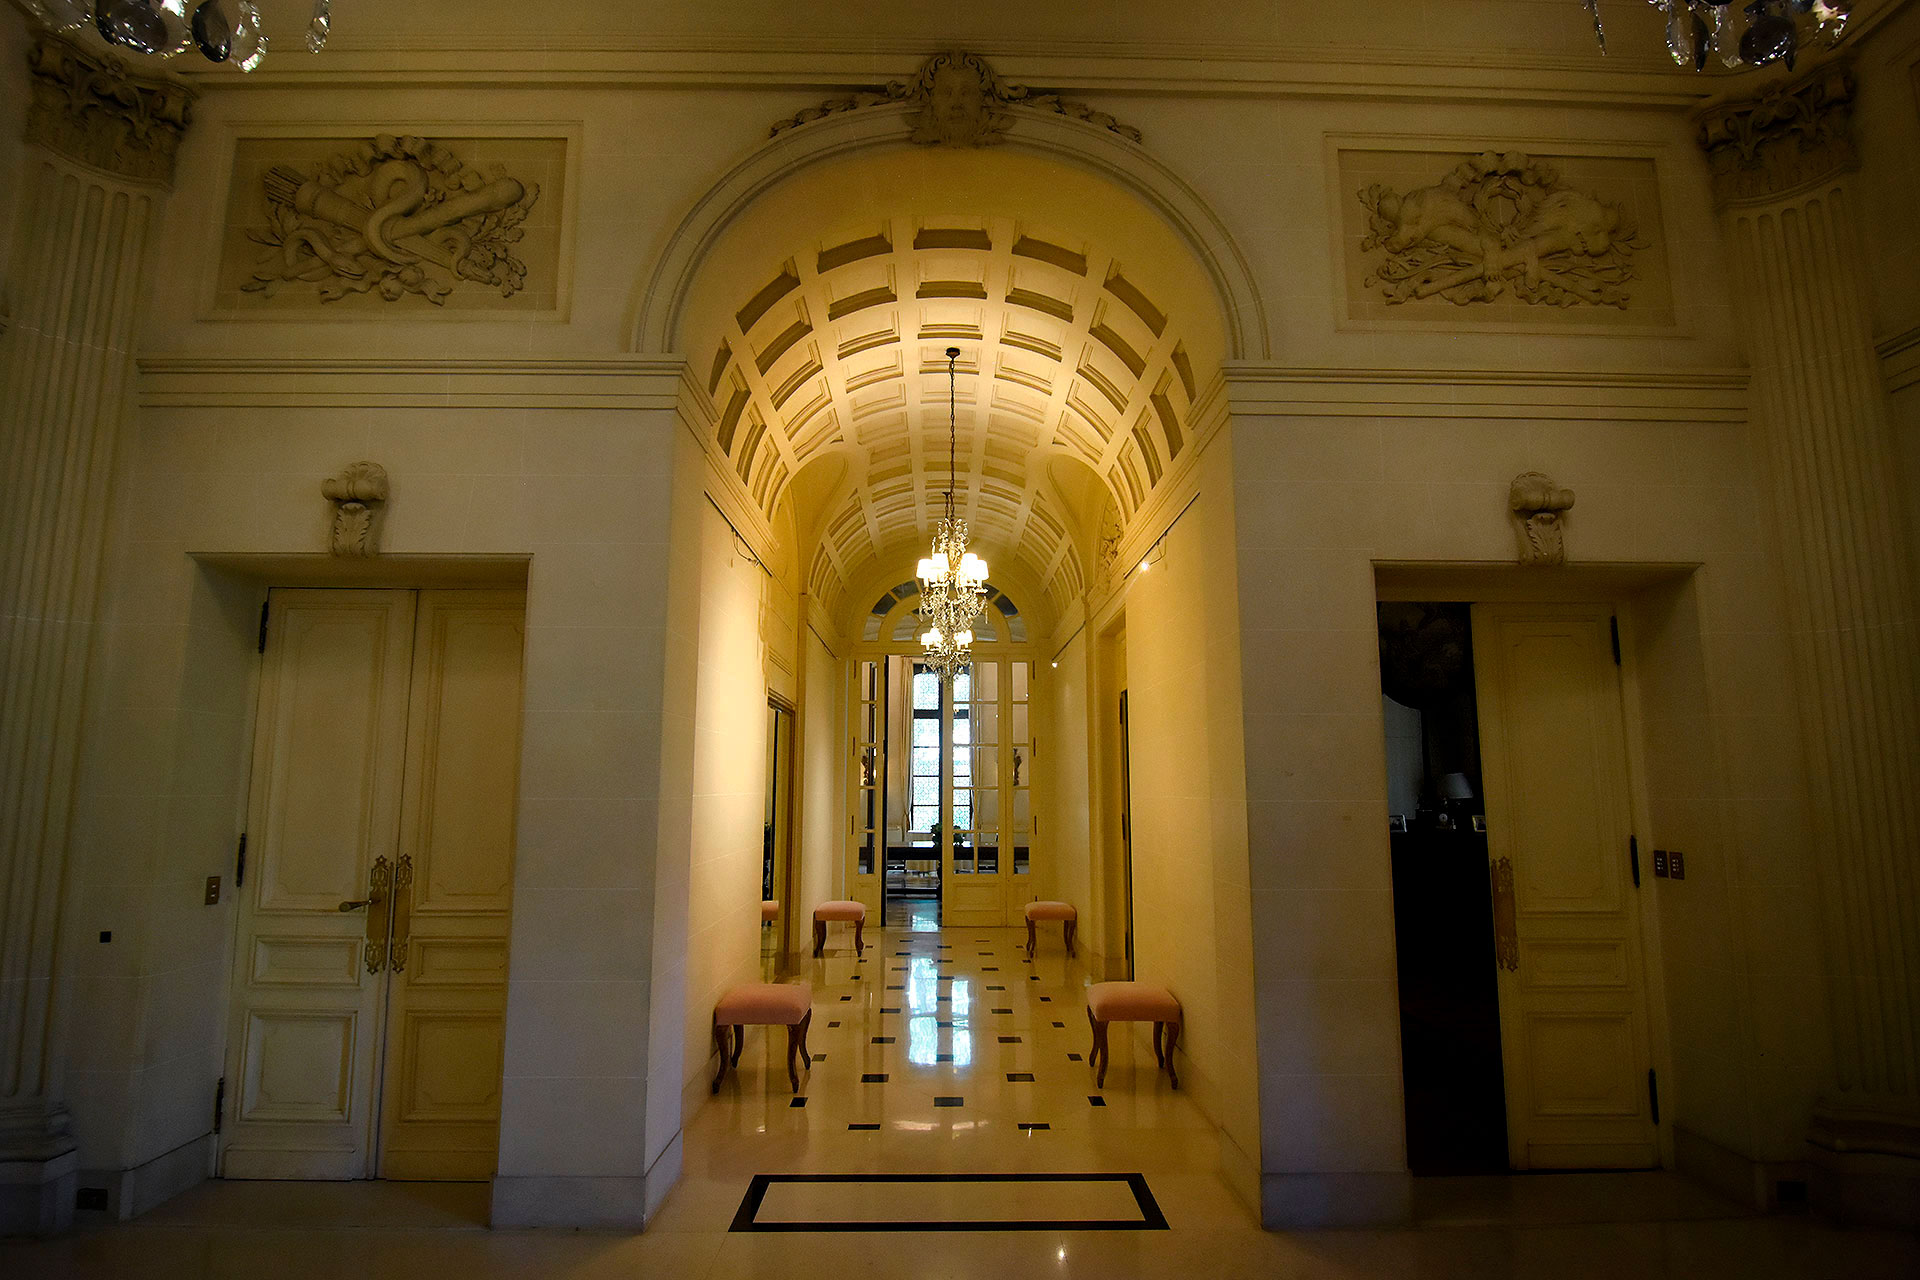 The decoration and furniture were all imported from Italy in 1924 and fit perfectly with the French style of the palace.  The only exception is the red armchair in the entrance hall that was donated after a recent exhibition of Italian design at the National Museum of Decorative Art (Nicolas Stulberg)